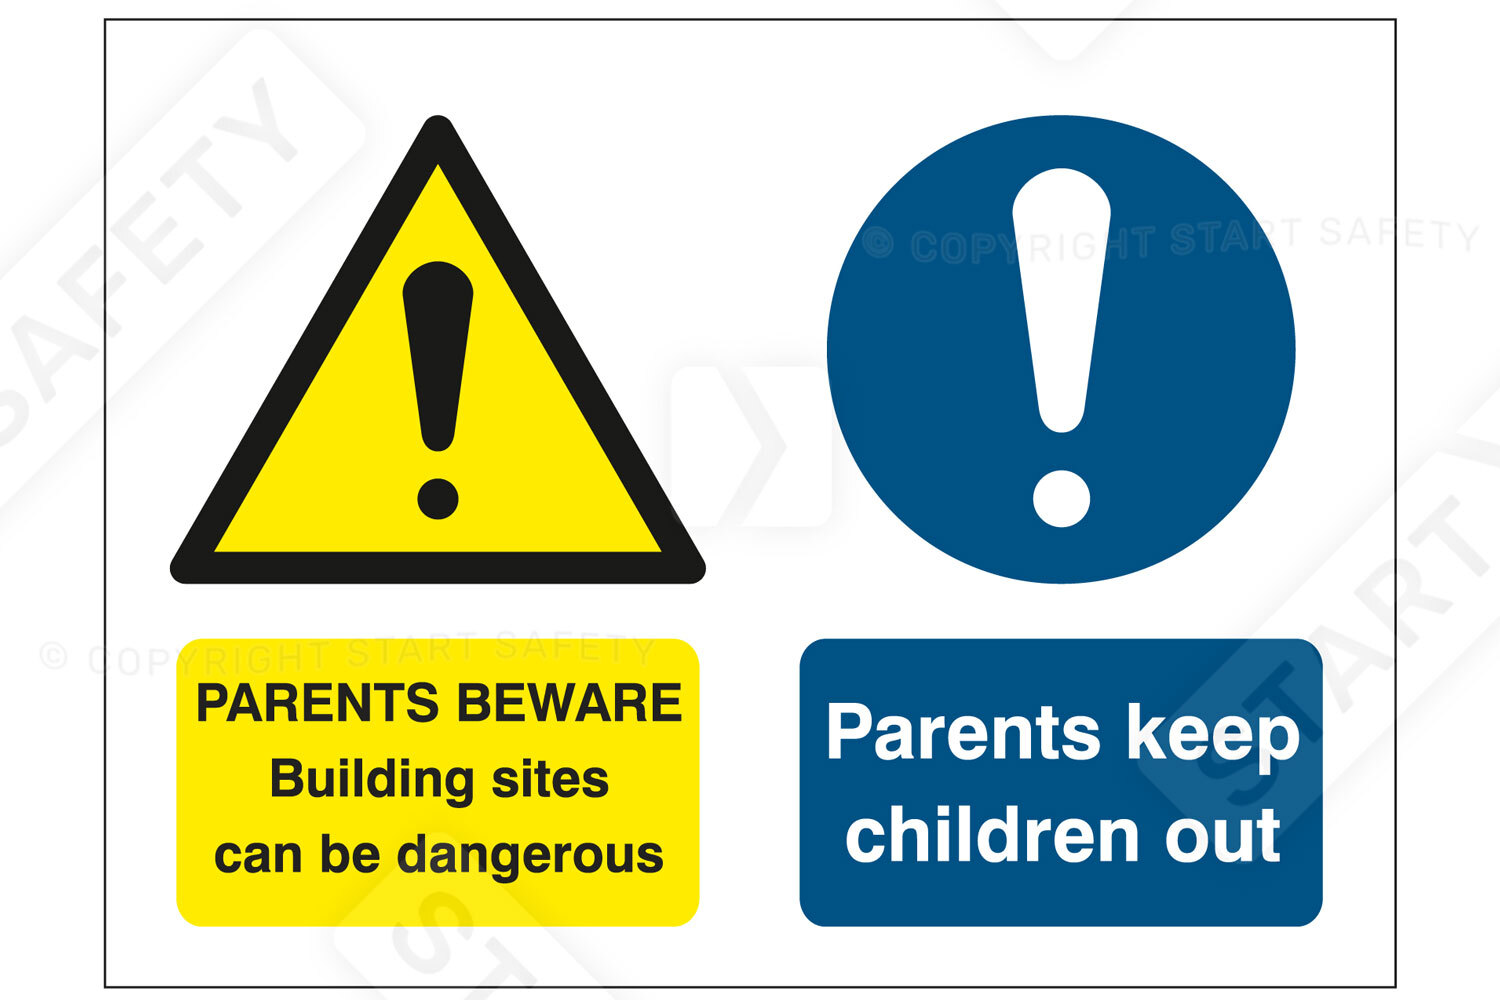 A simple sign warning parents that building sites are dangerous